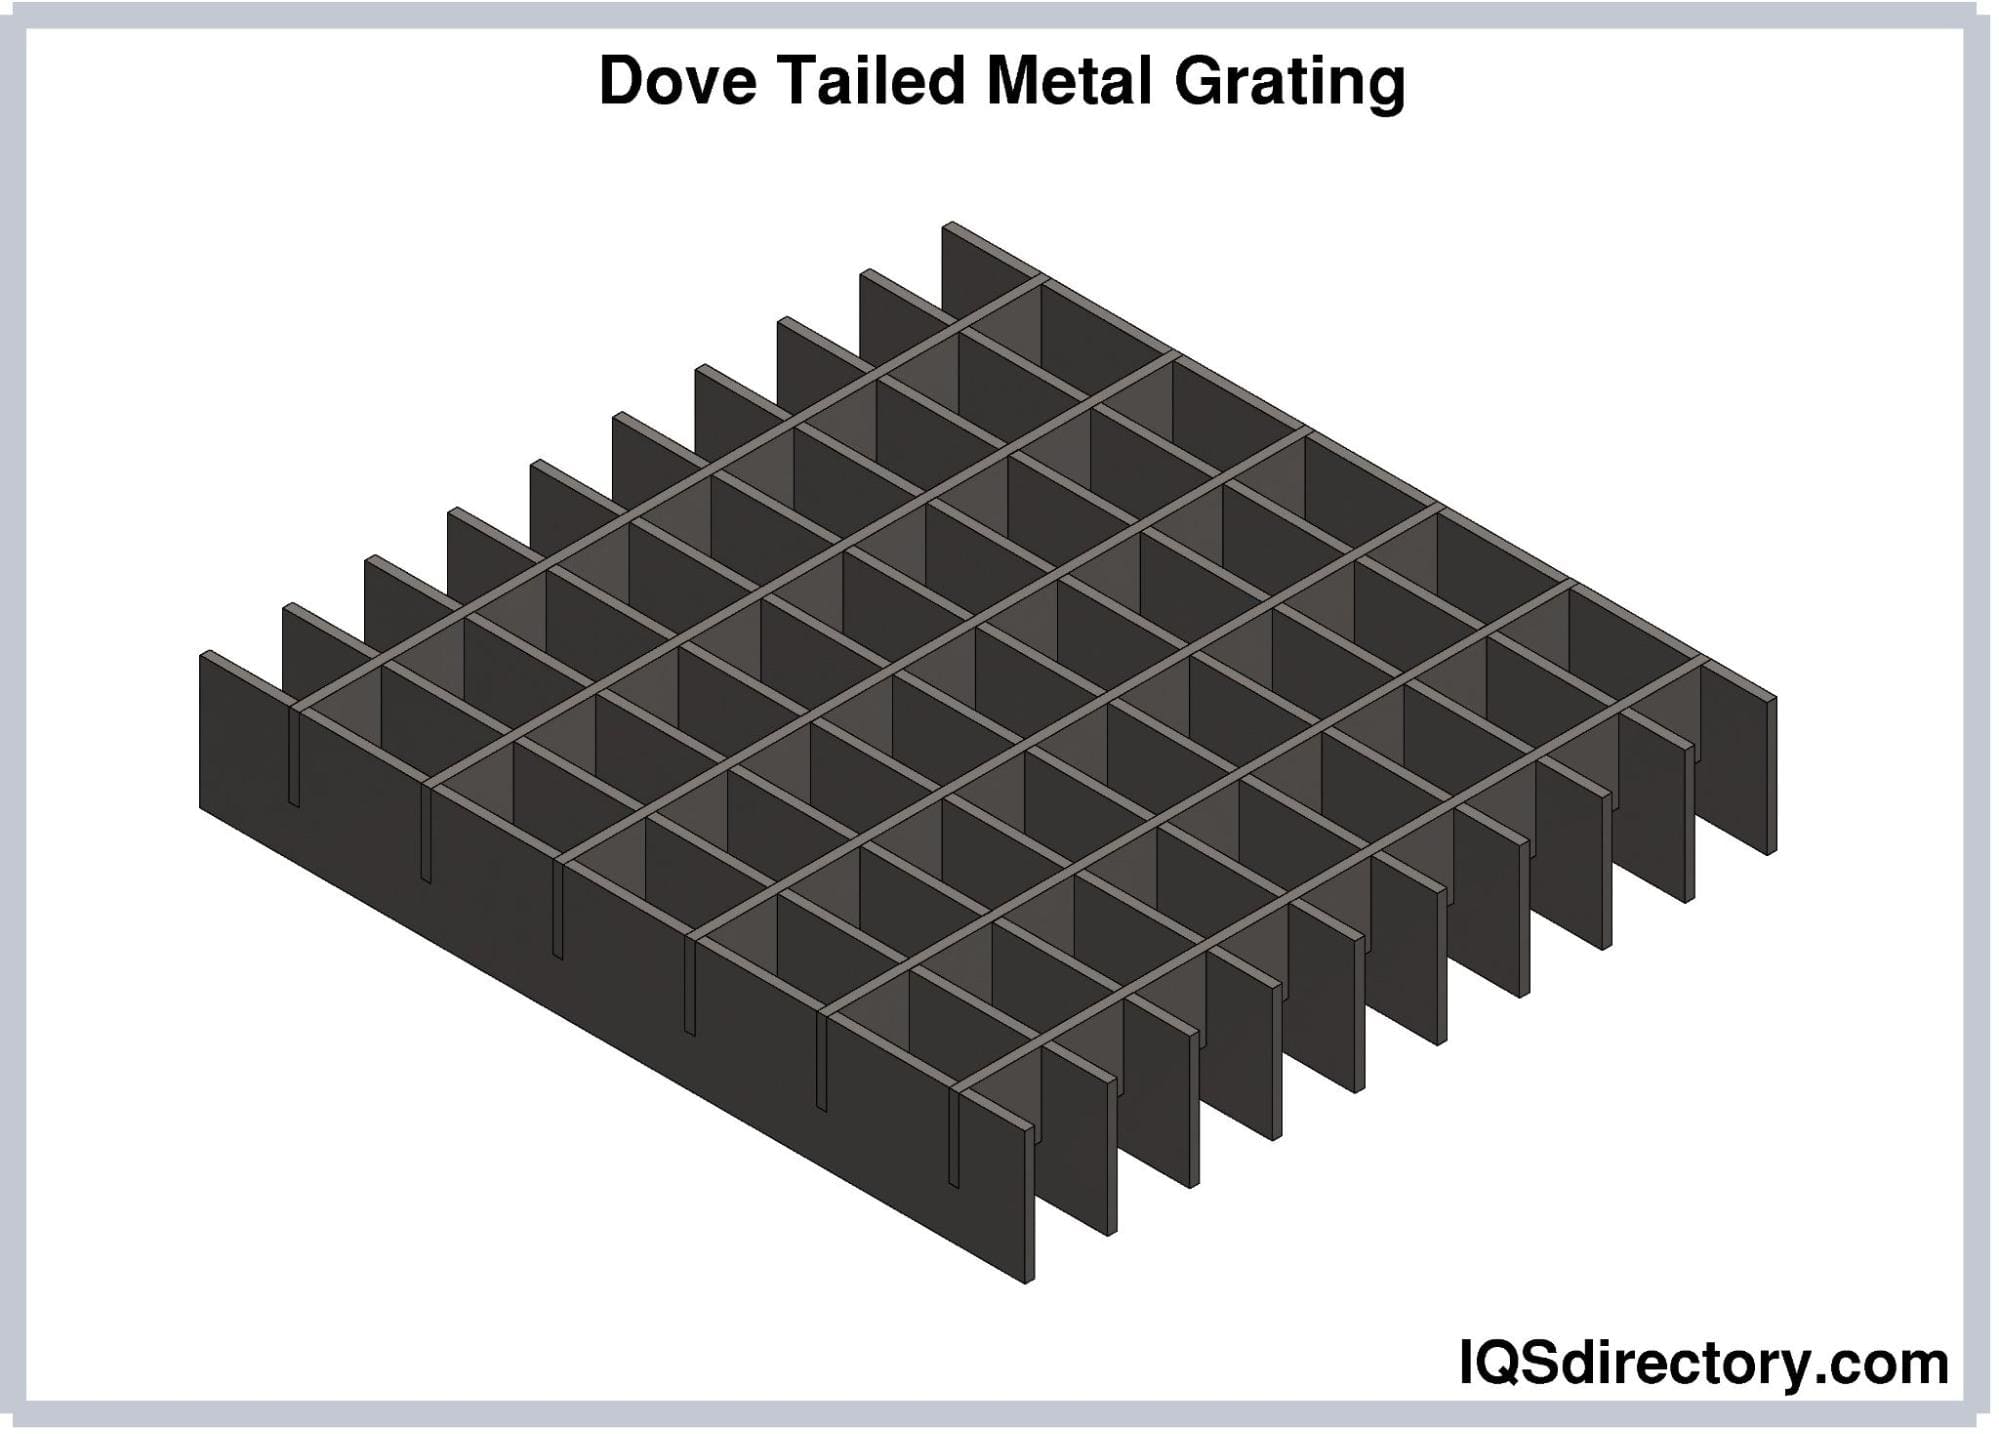 grube jord Rig mand Metal Grating: What Is It? How Is It Used? Types Of